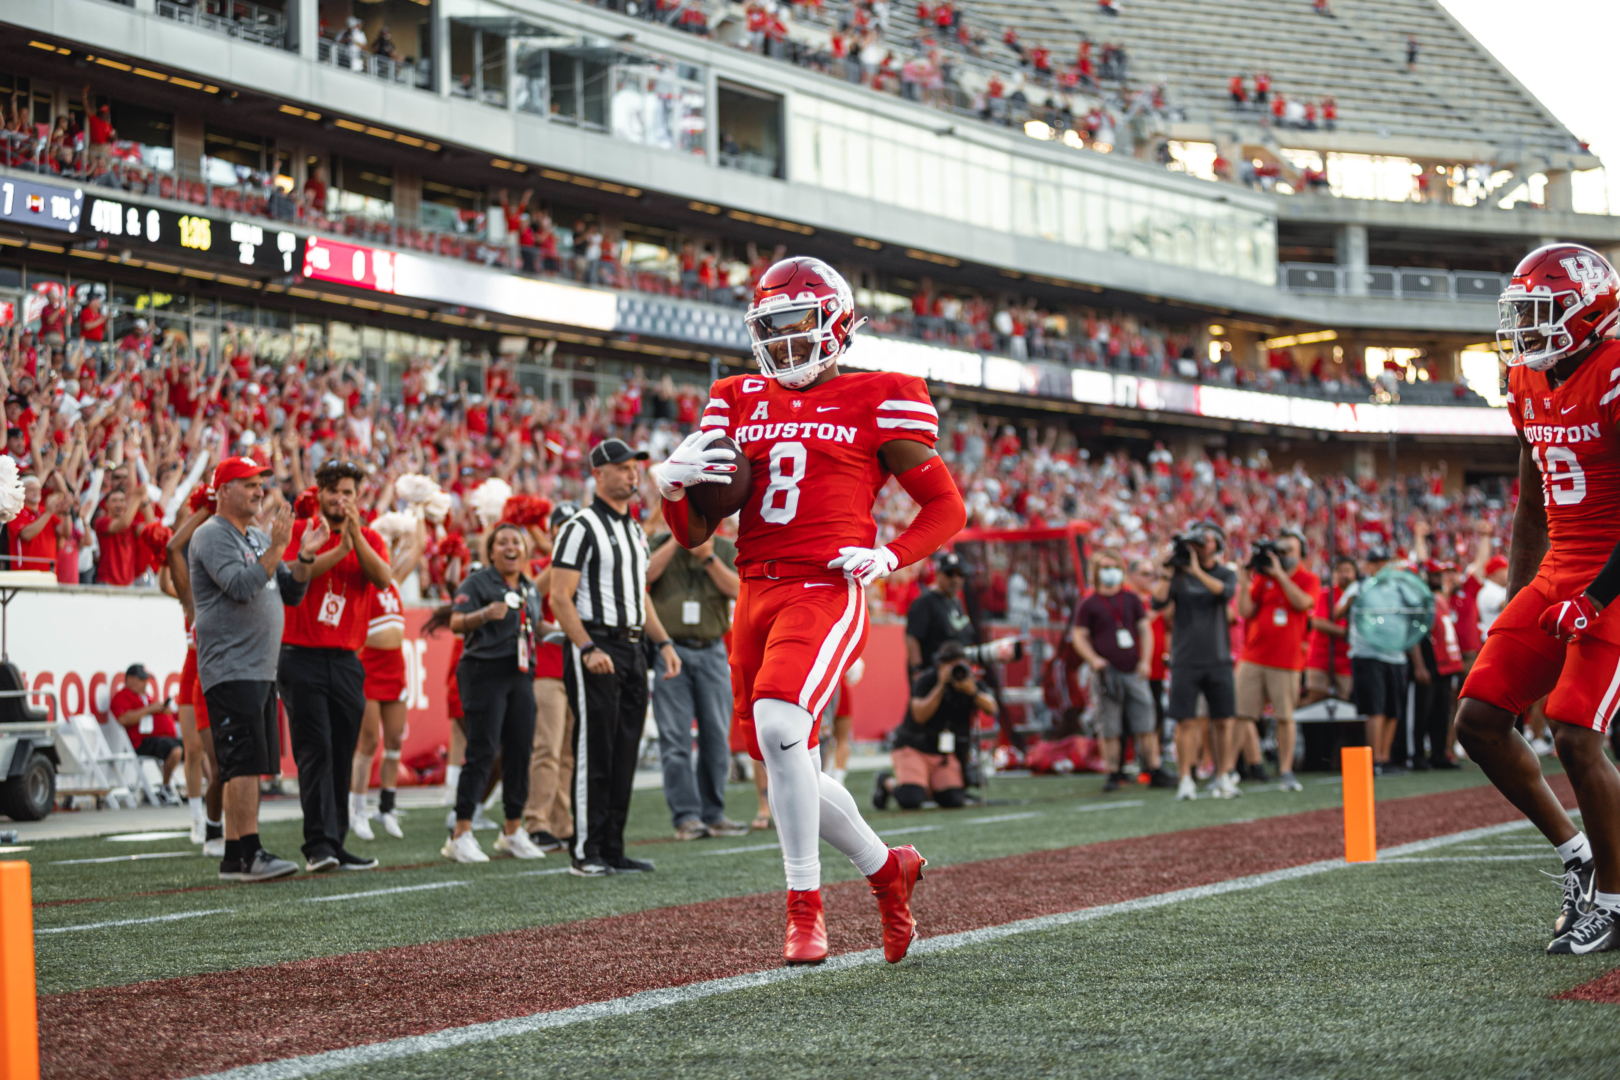 Senior Marcus Jones was all smiles as he returned a punt for a touchdown for the second straight week in UH football's win over Navy. | James Schillinger